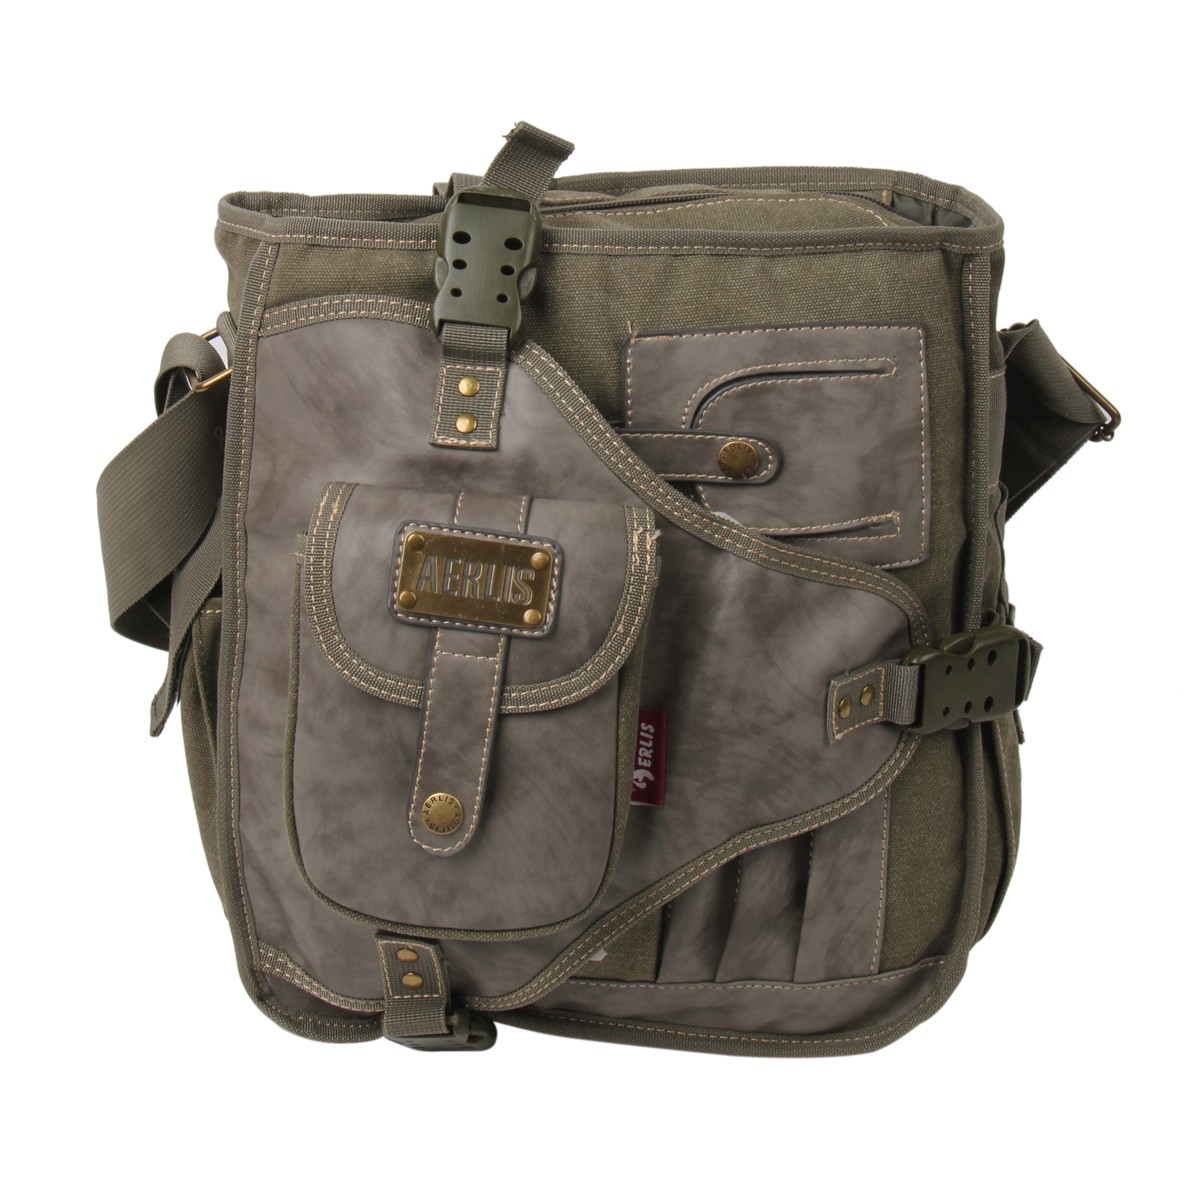 Best Travel Shoulder Bags For Men | Confederated Tribes of the Umatilla Indian Reservation